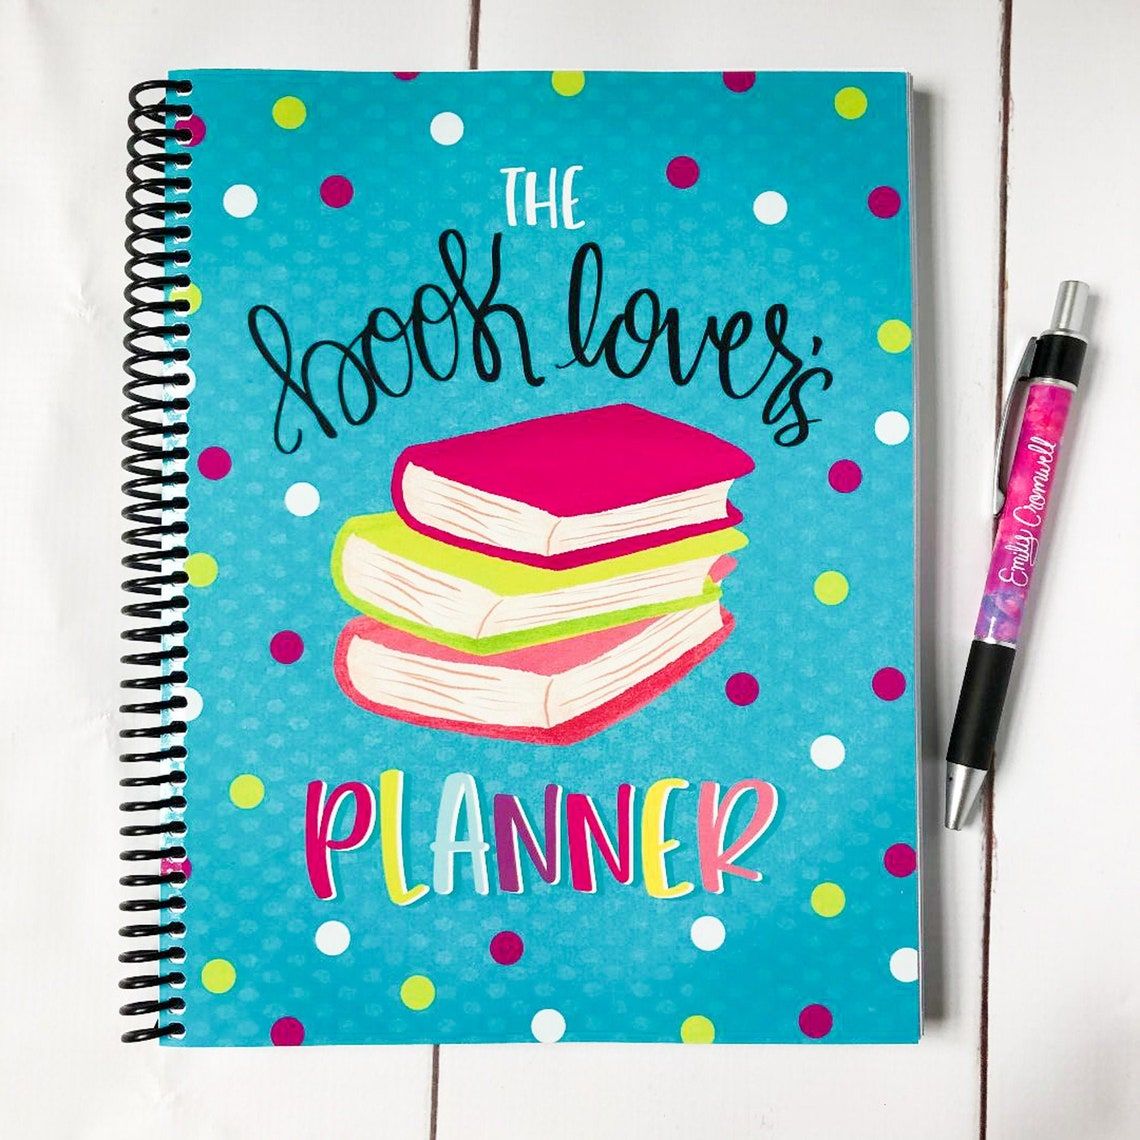 The Book Lover's Planner, showing a colourful polka dot cover and a stack of cartoon books